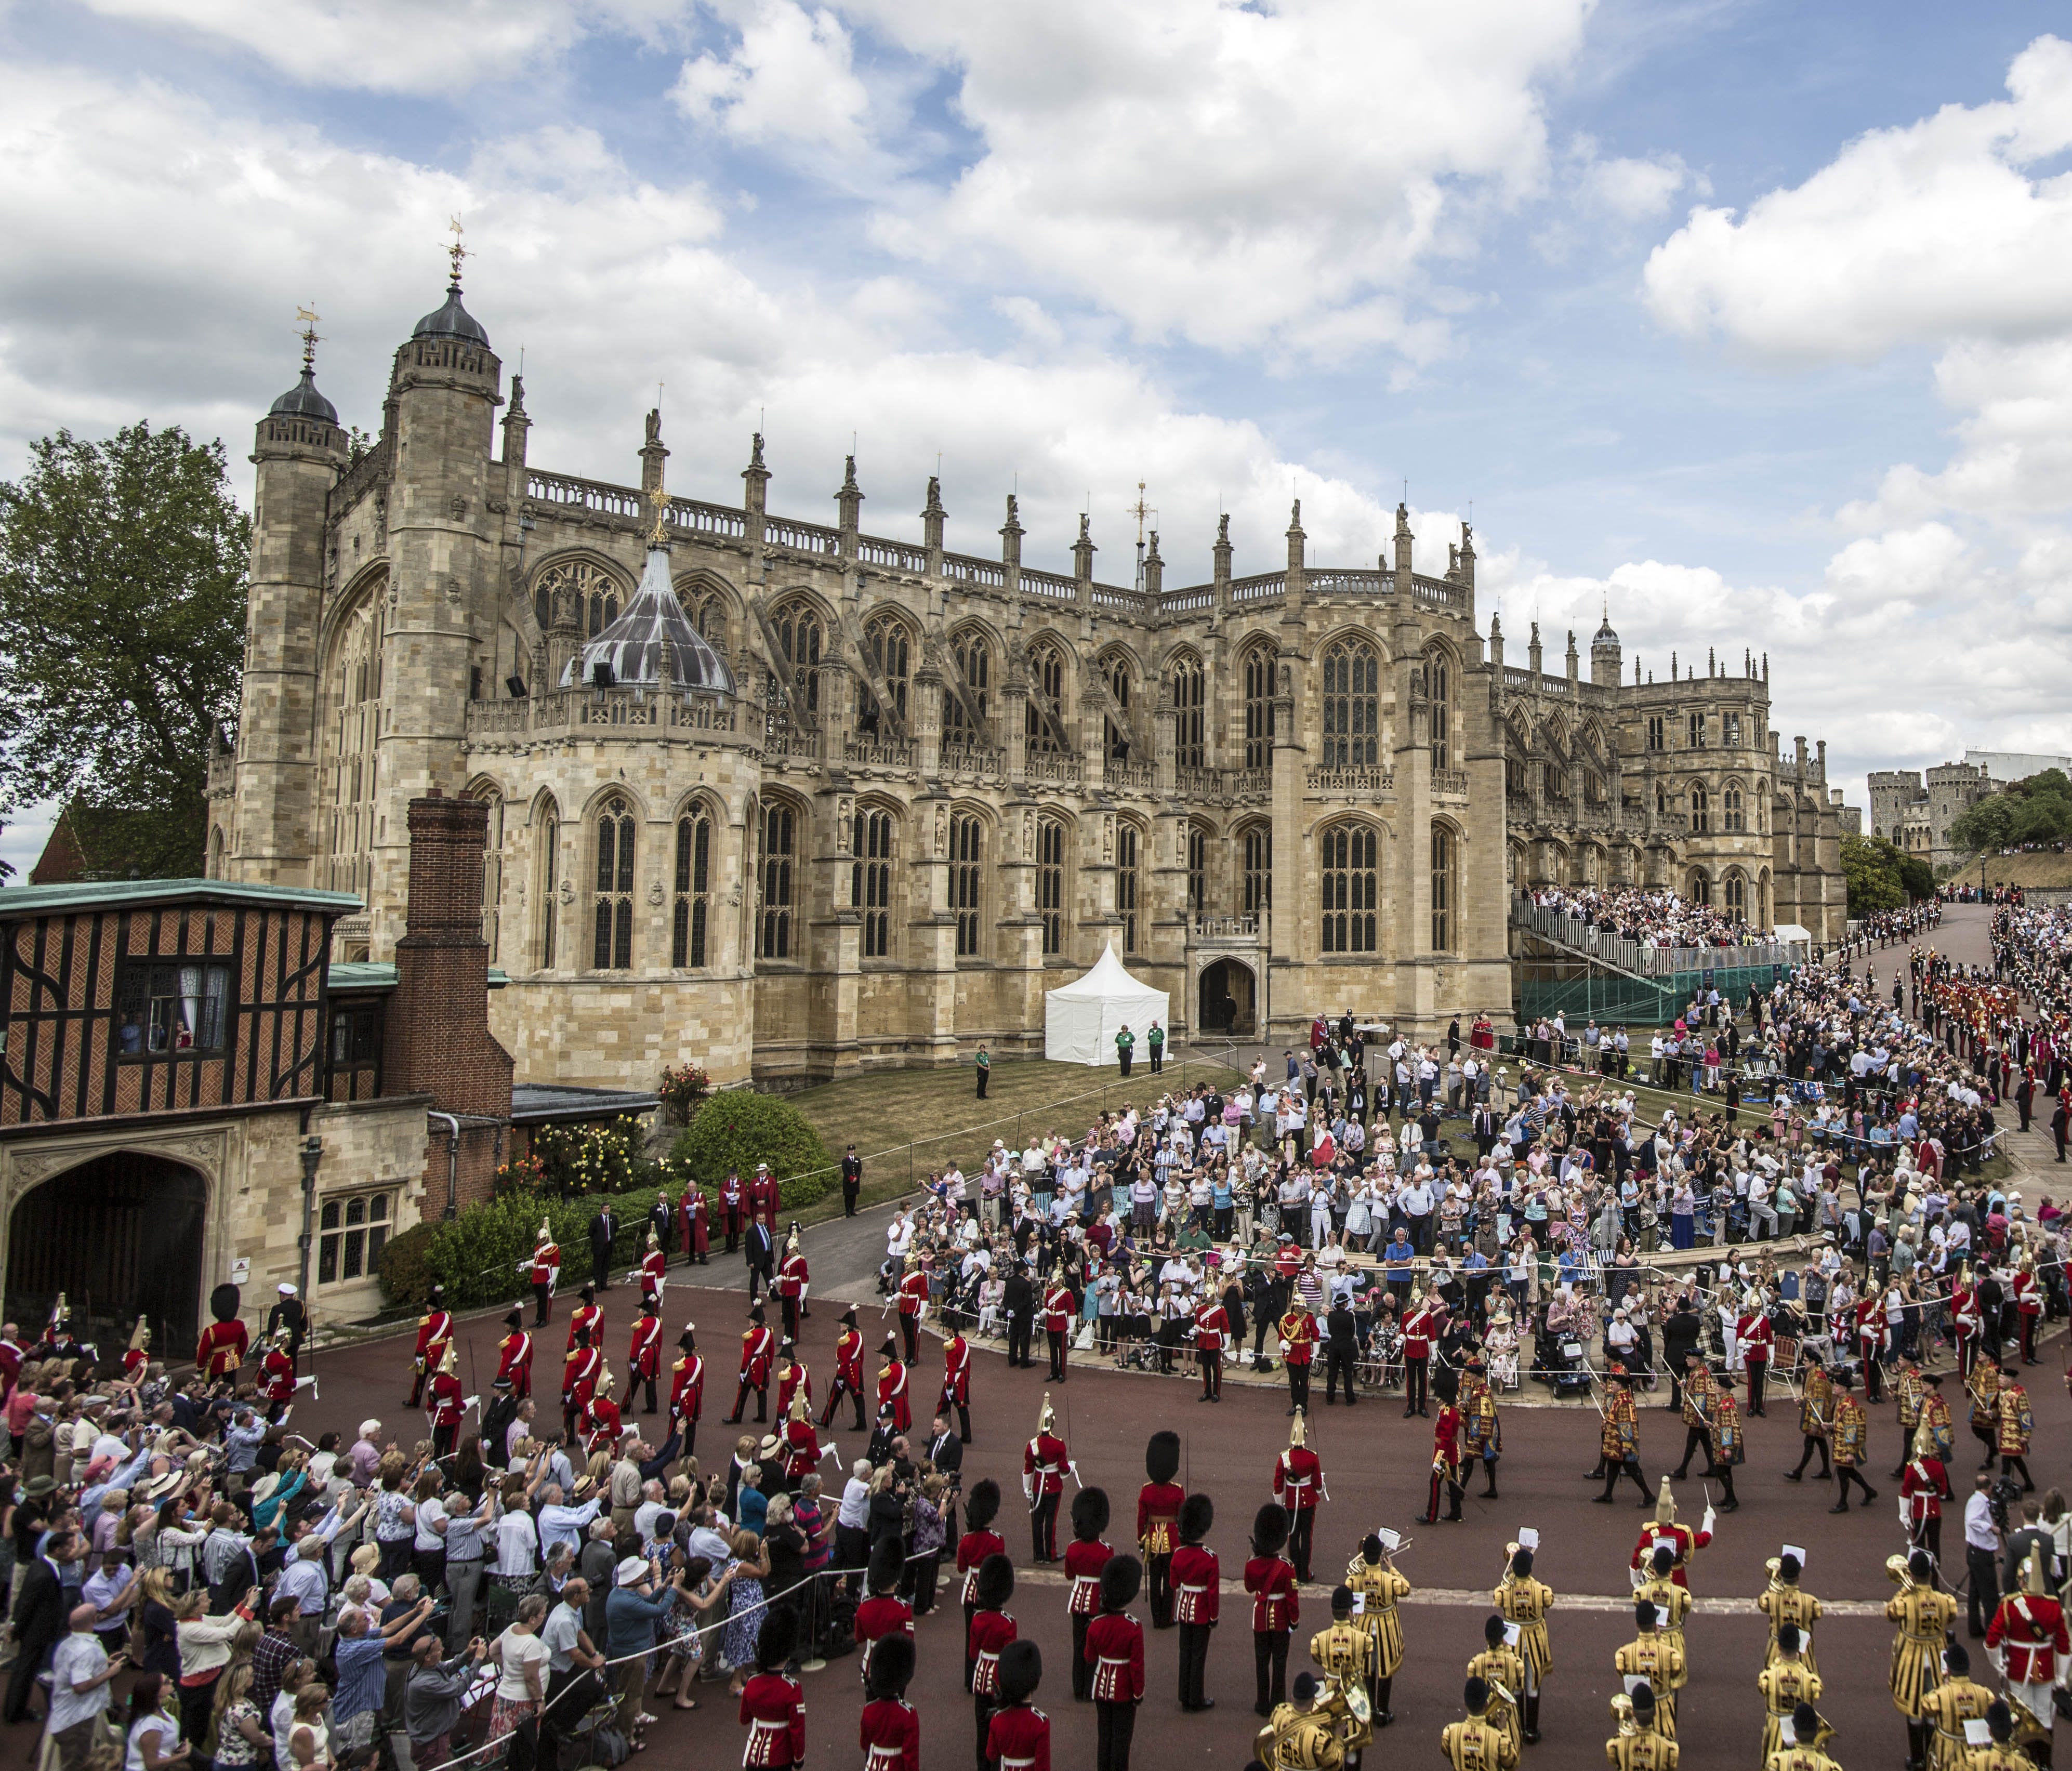 St. George's Chapel, seen during the 2005 Order of the Garter service, is quite fancy enough for a royal wedding.